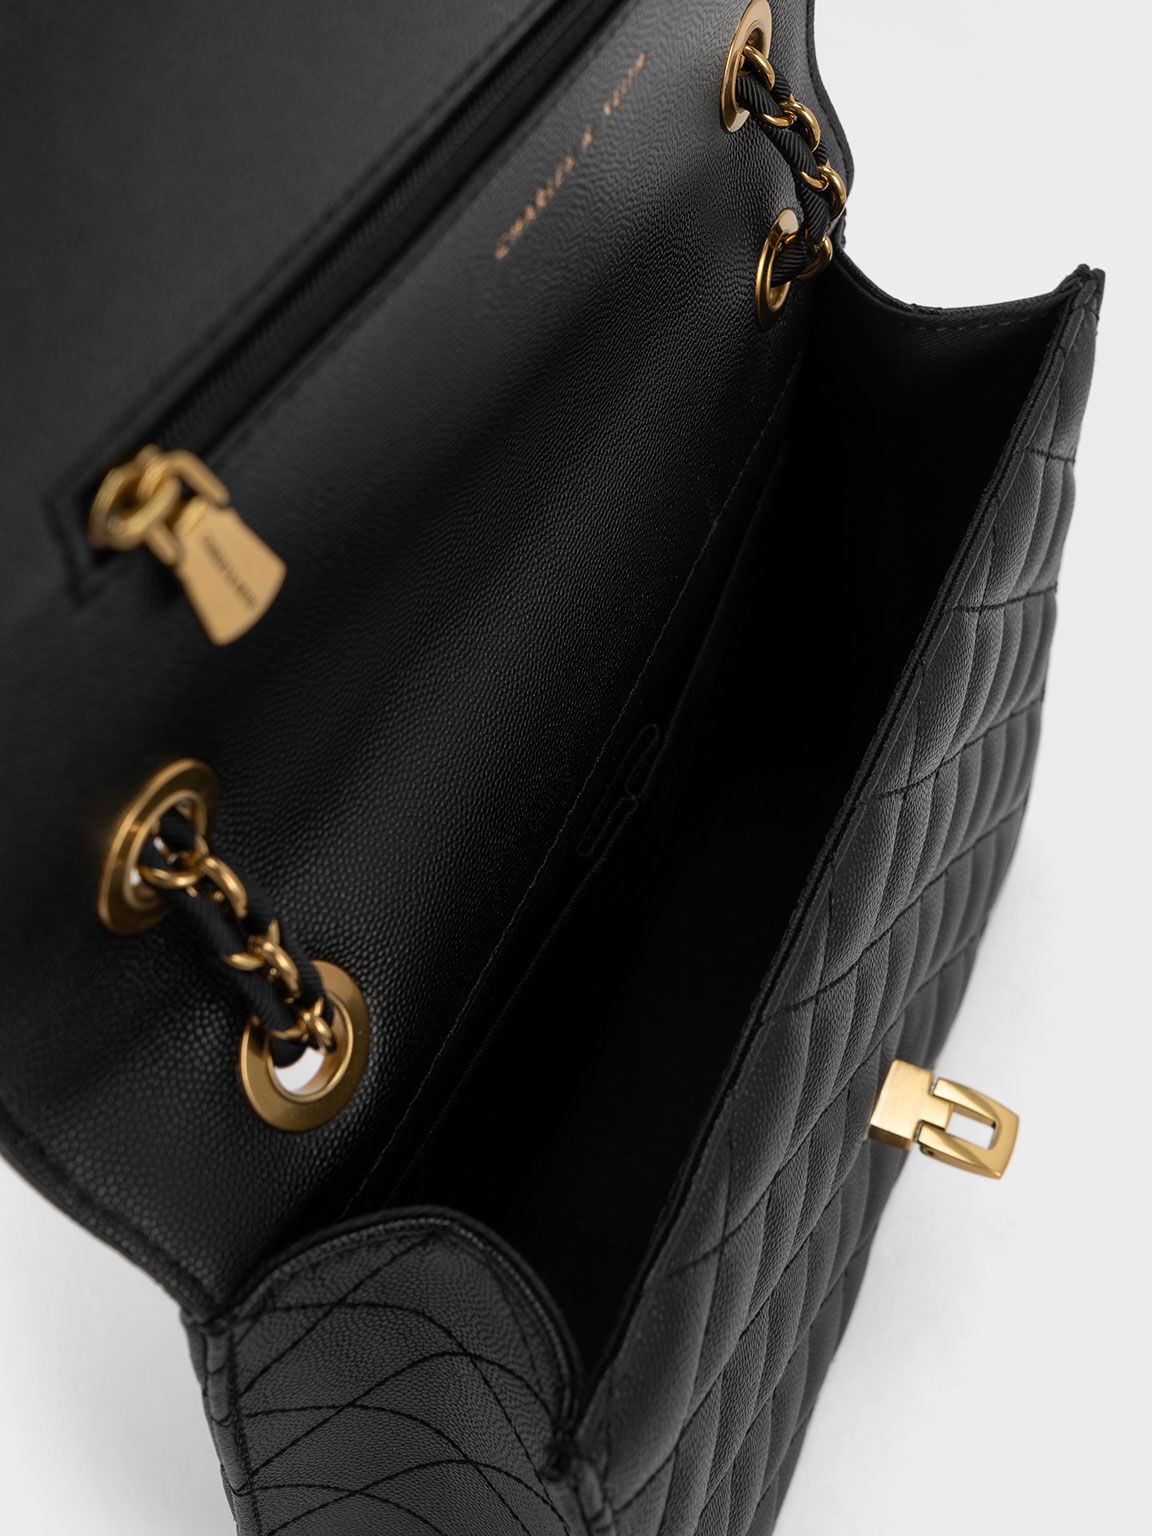 Charles & Keith Charles Keith Black Saddle Bag With Gold Chain Detail - $56  - From Emmy